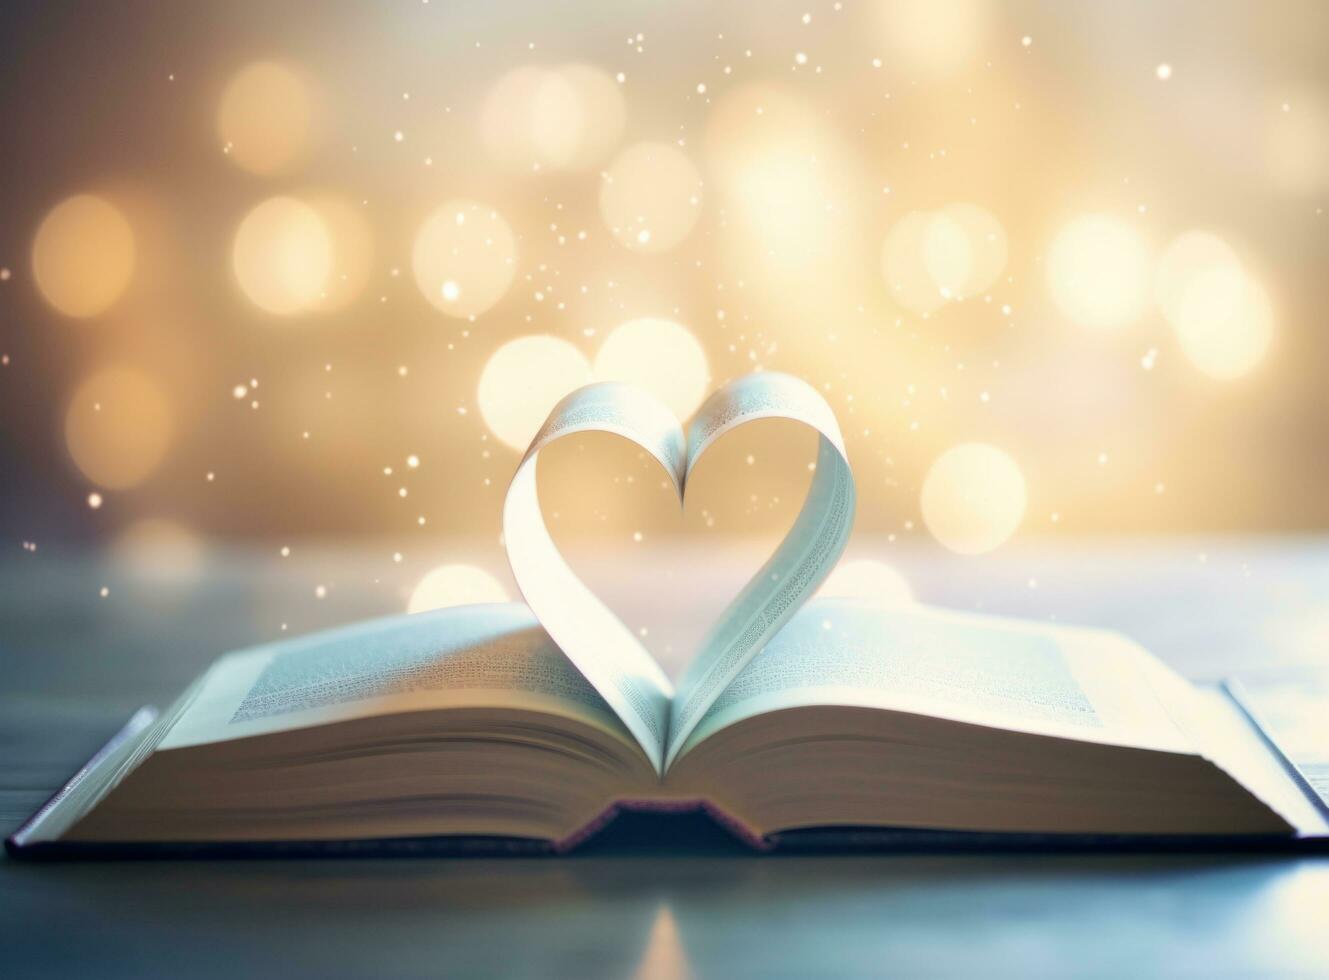 AI generated an open book shaped like a heart against the light of the background photo